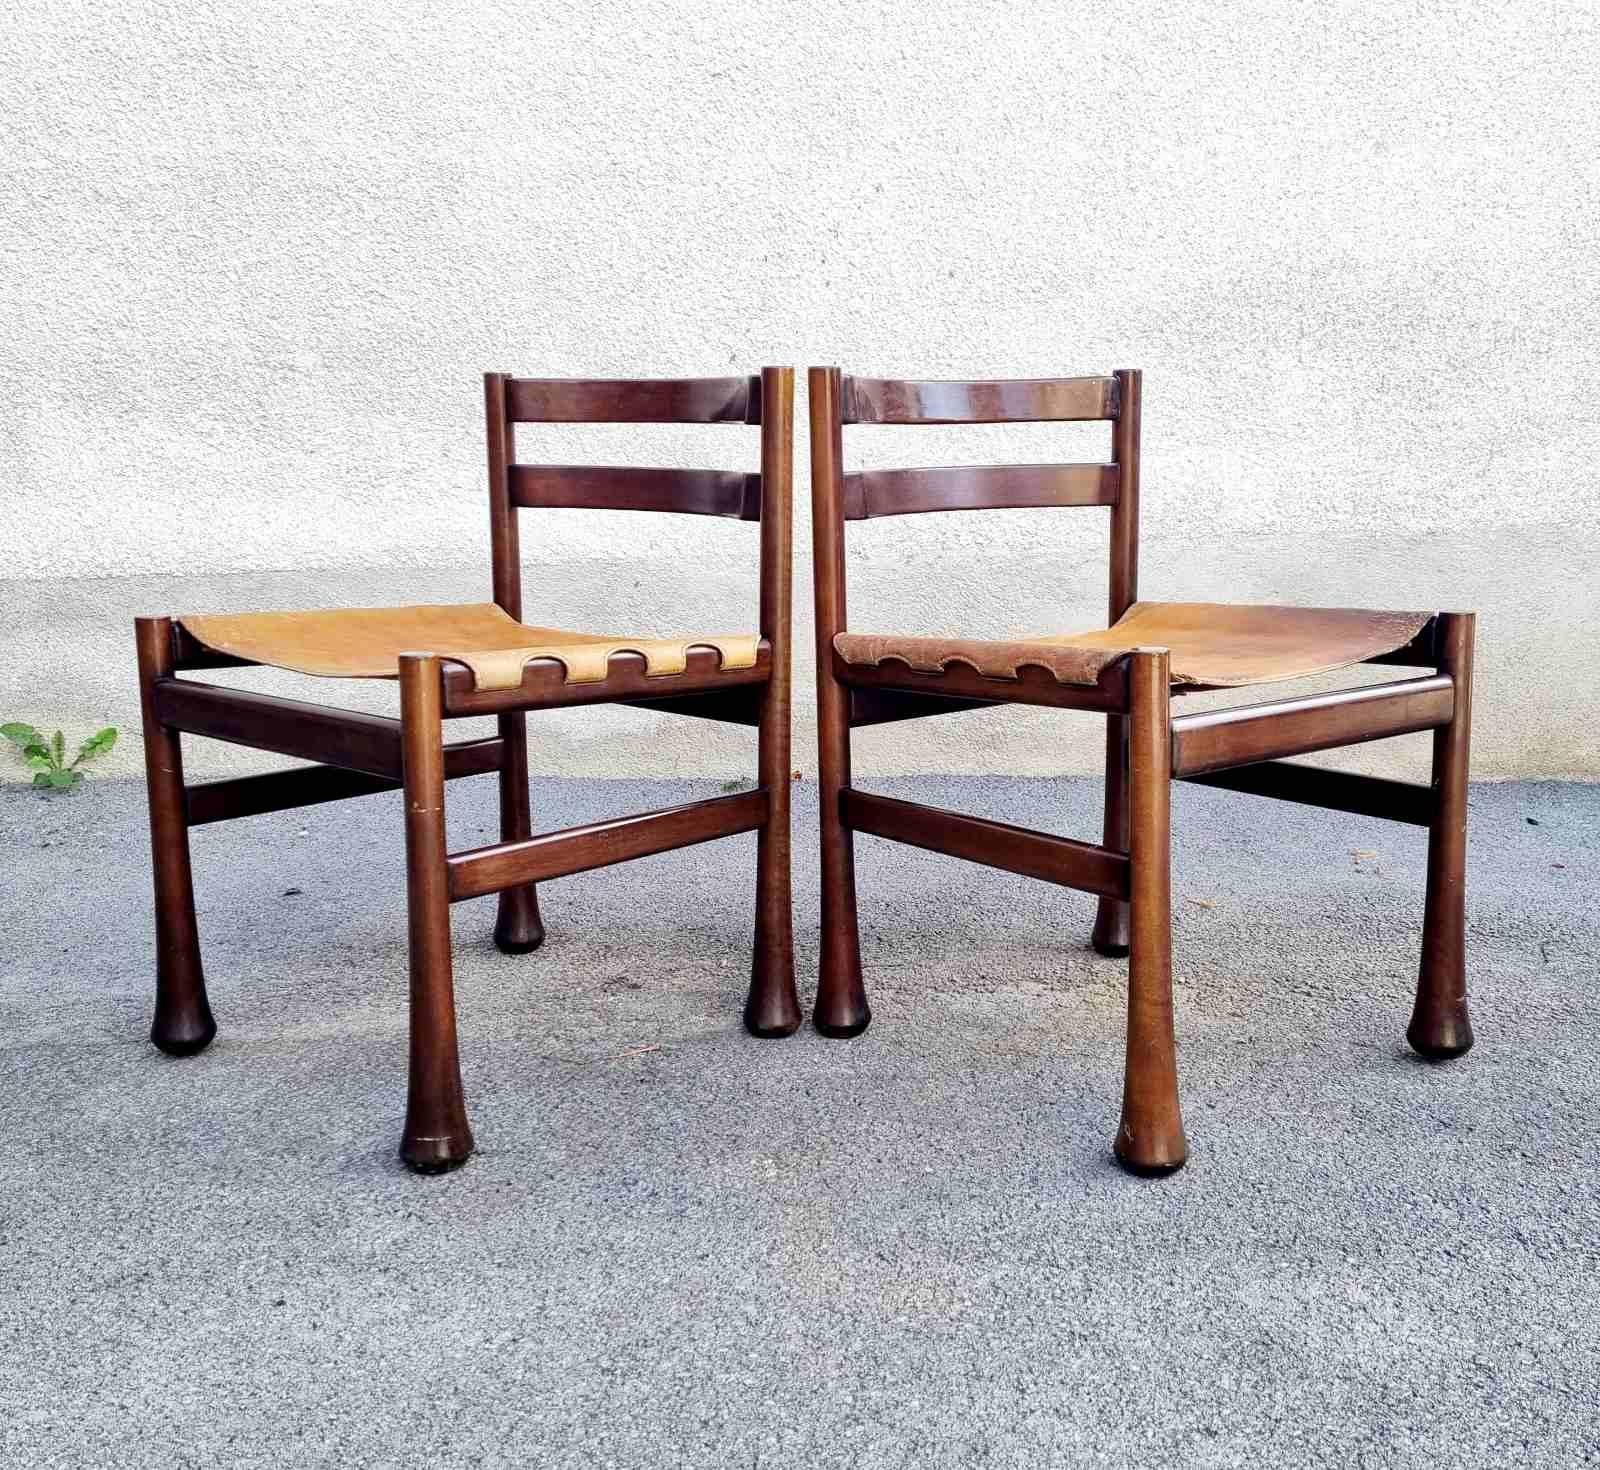 Italian Modern Rosewood and Leather Dining Chairs, Design Luciano Frigerio, 70s For Sale 10